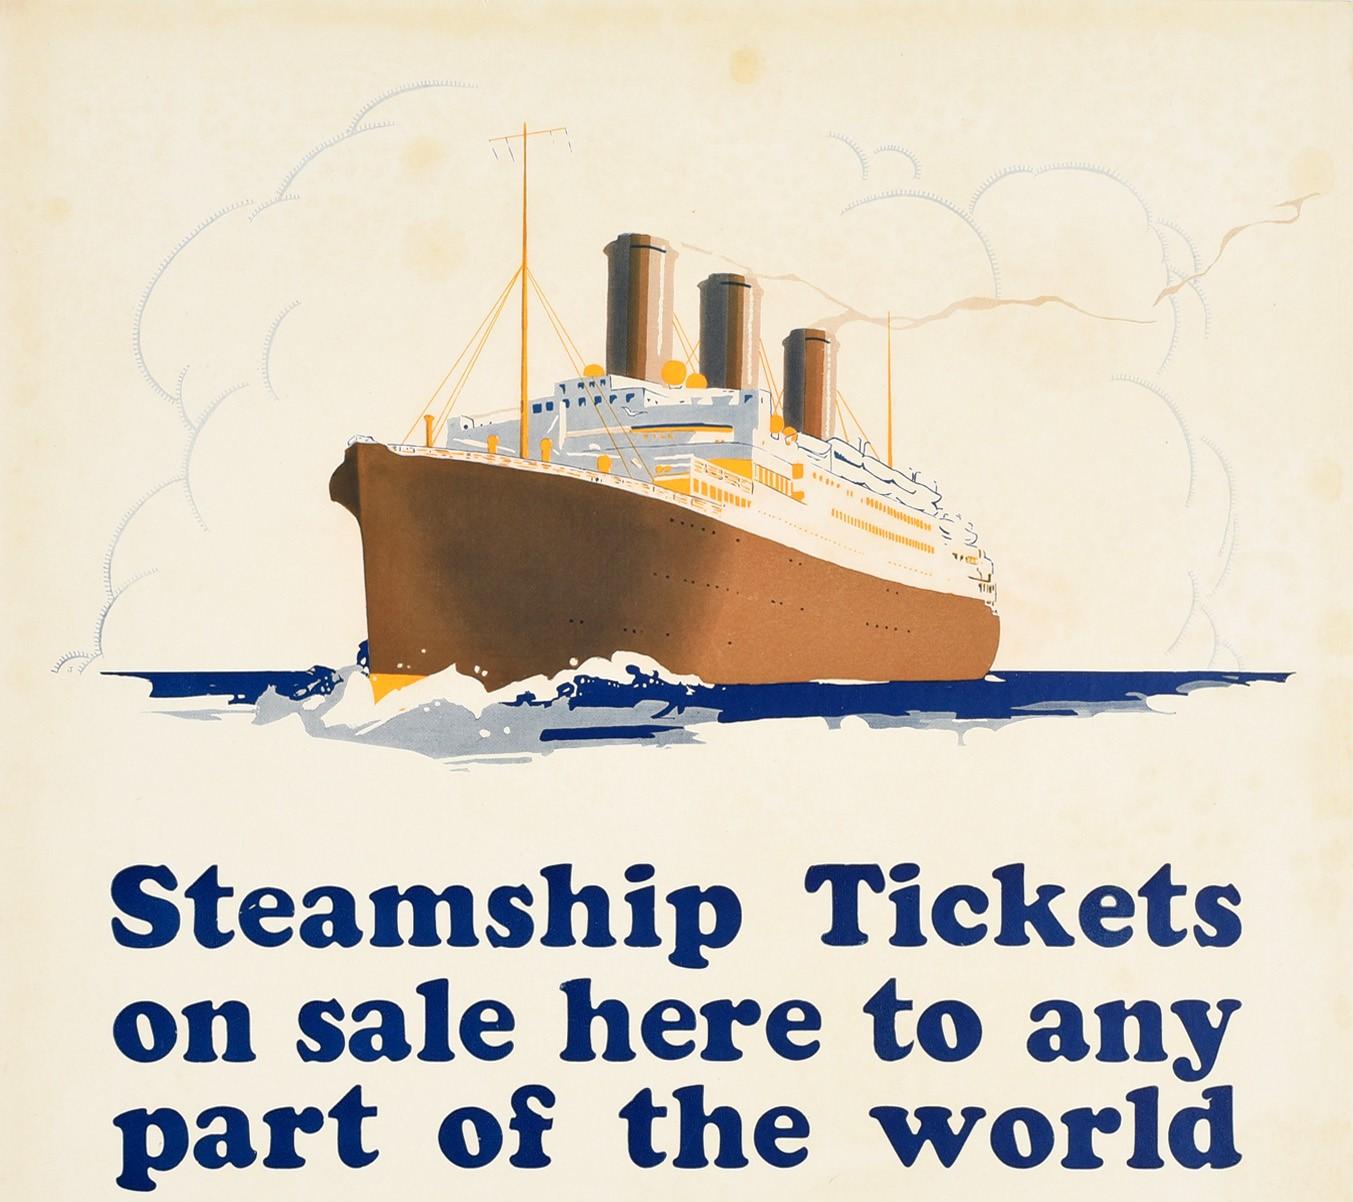 Original vintage cruise travel advertising poster issued by Southern Pacific featuring an ocean liner sailing at sea with the steam rising into a lightly cloudy sky above the bold blue stylised text - Steamship Tickets on sale here to any part of